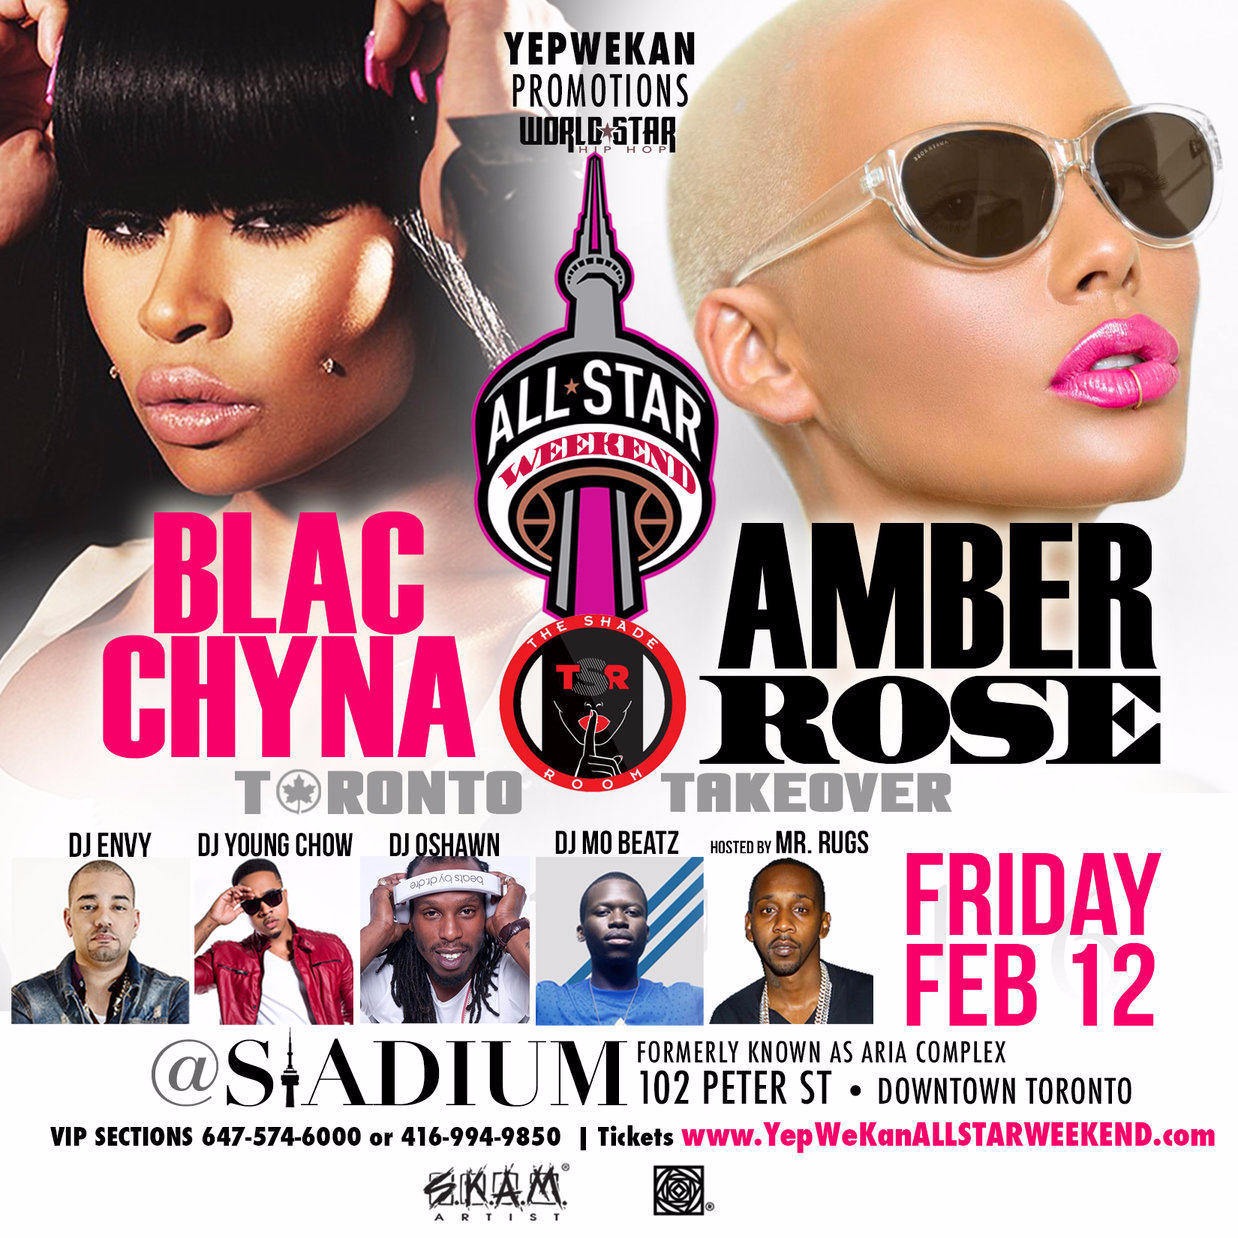 NBA ALL-STAR WEEKEND TAKEOVER 2016 Ft. AMBER ROSE & BLAC CHYNA